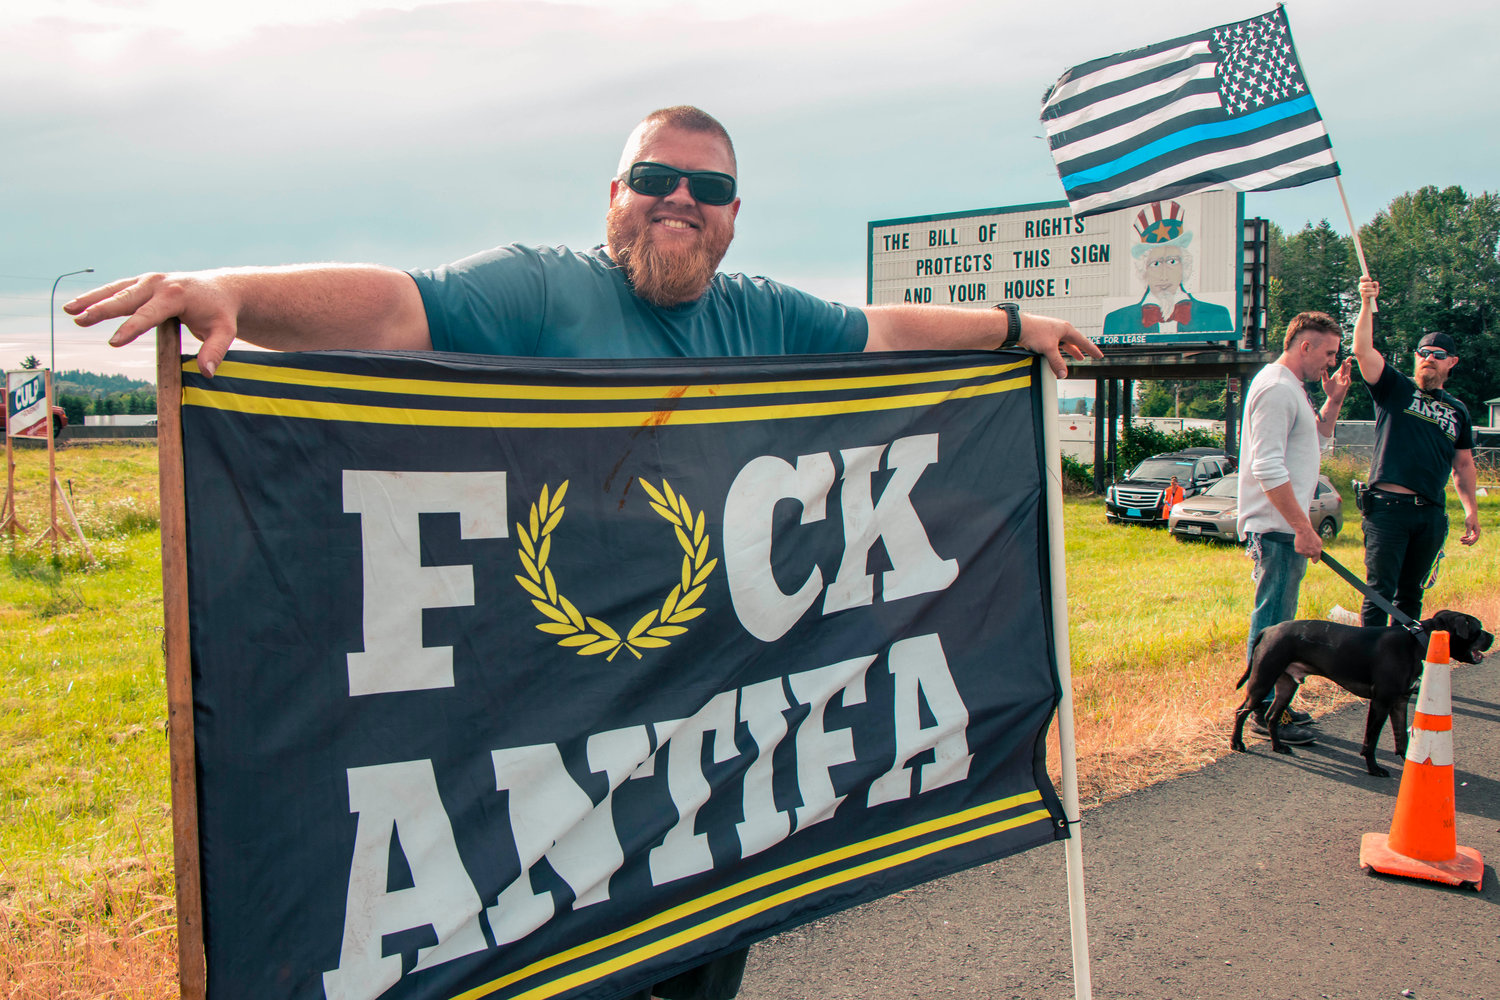 Scott, from Clark County, holds a sign in opposition of ‘Antifa’ in front of the Hamilton sign Tuesday afternoon in Napavine.